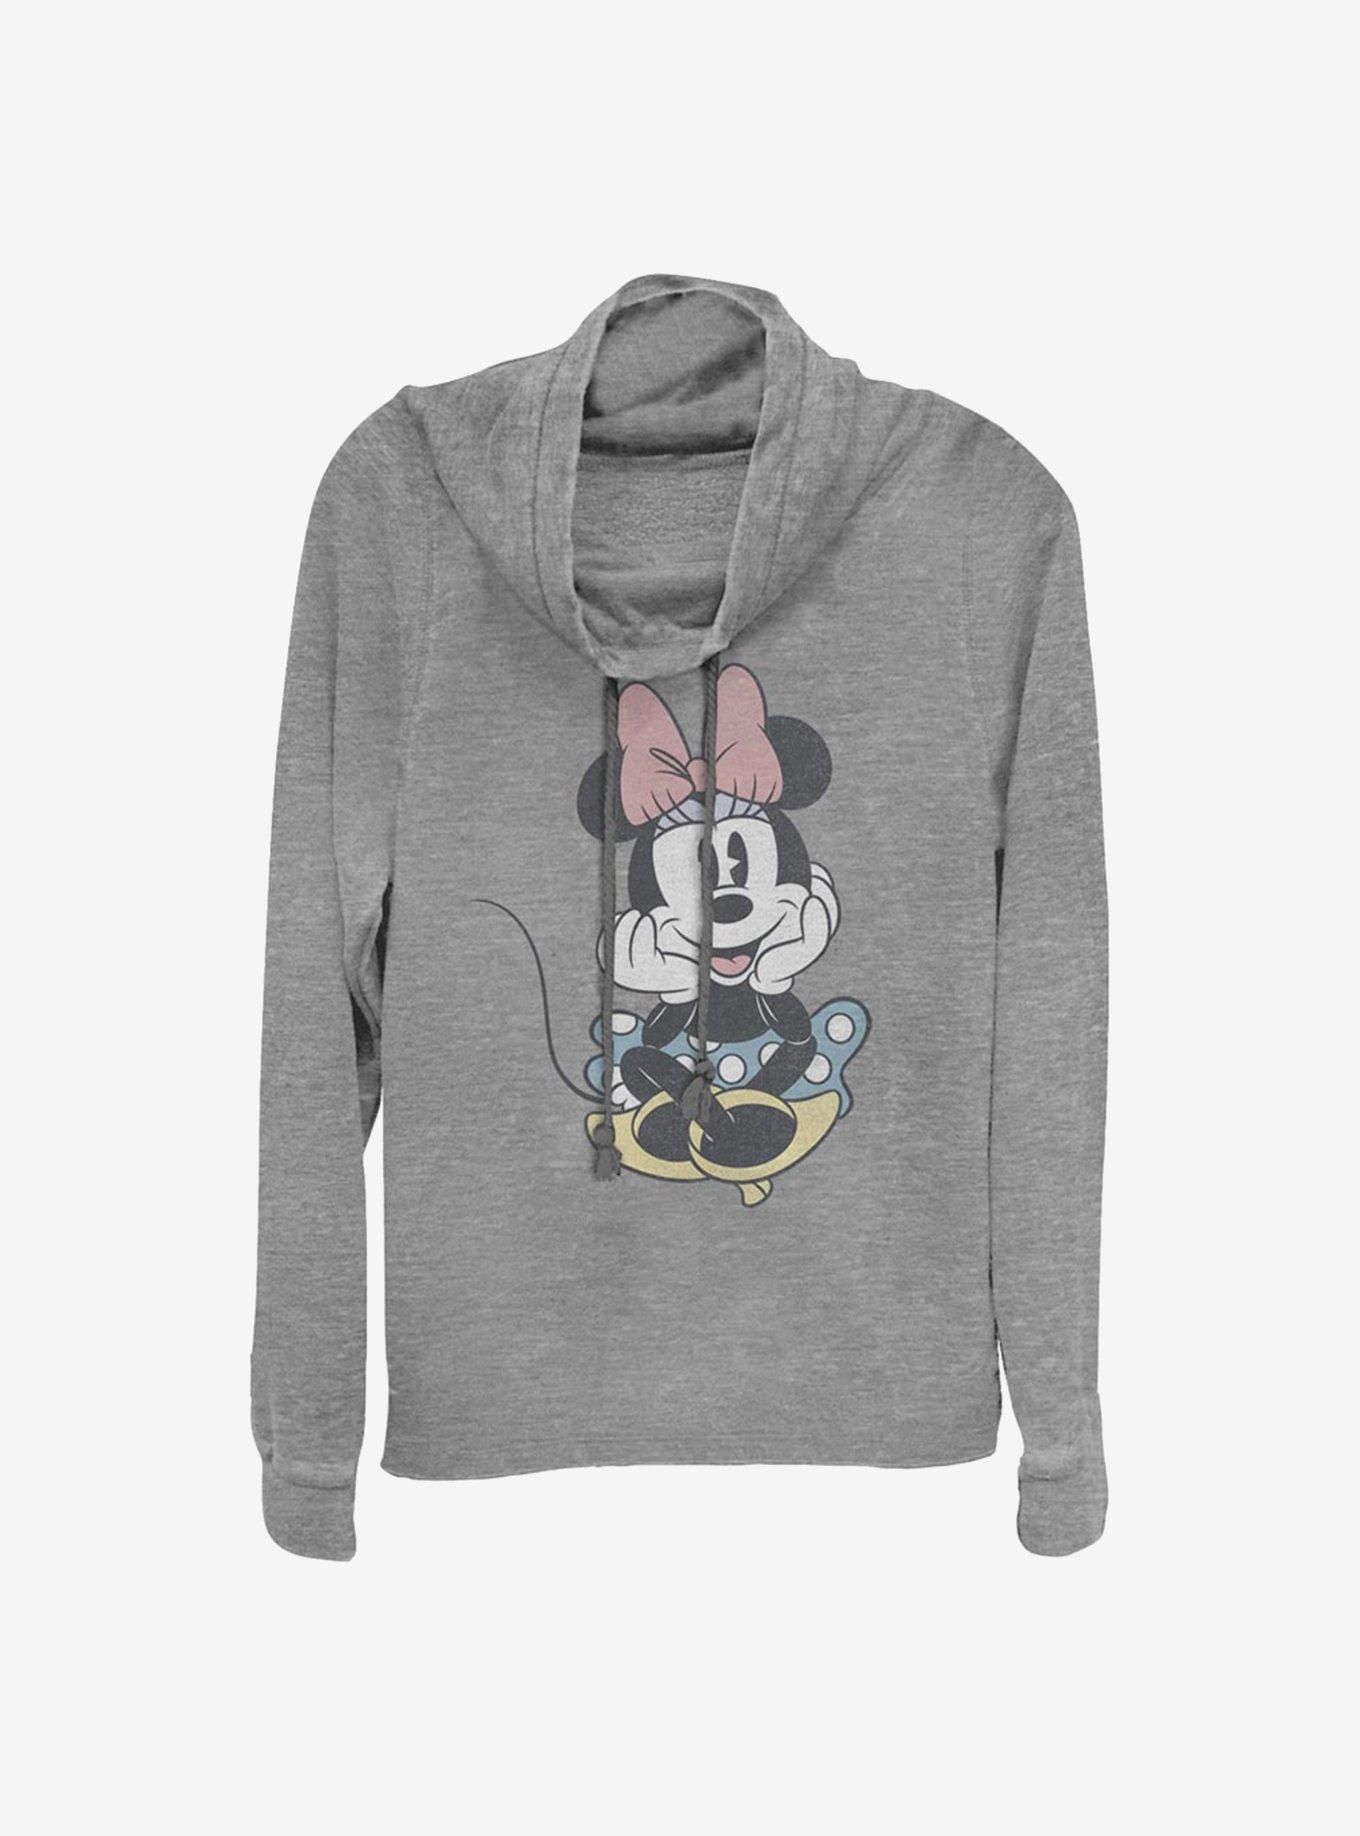 Disney Minnie Mouse Minnie Cute Pose Cowlneck Long-Sleeve Girls Top, GRAY HTR, hi-res